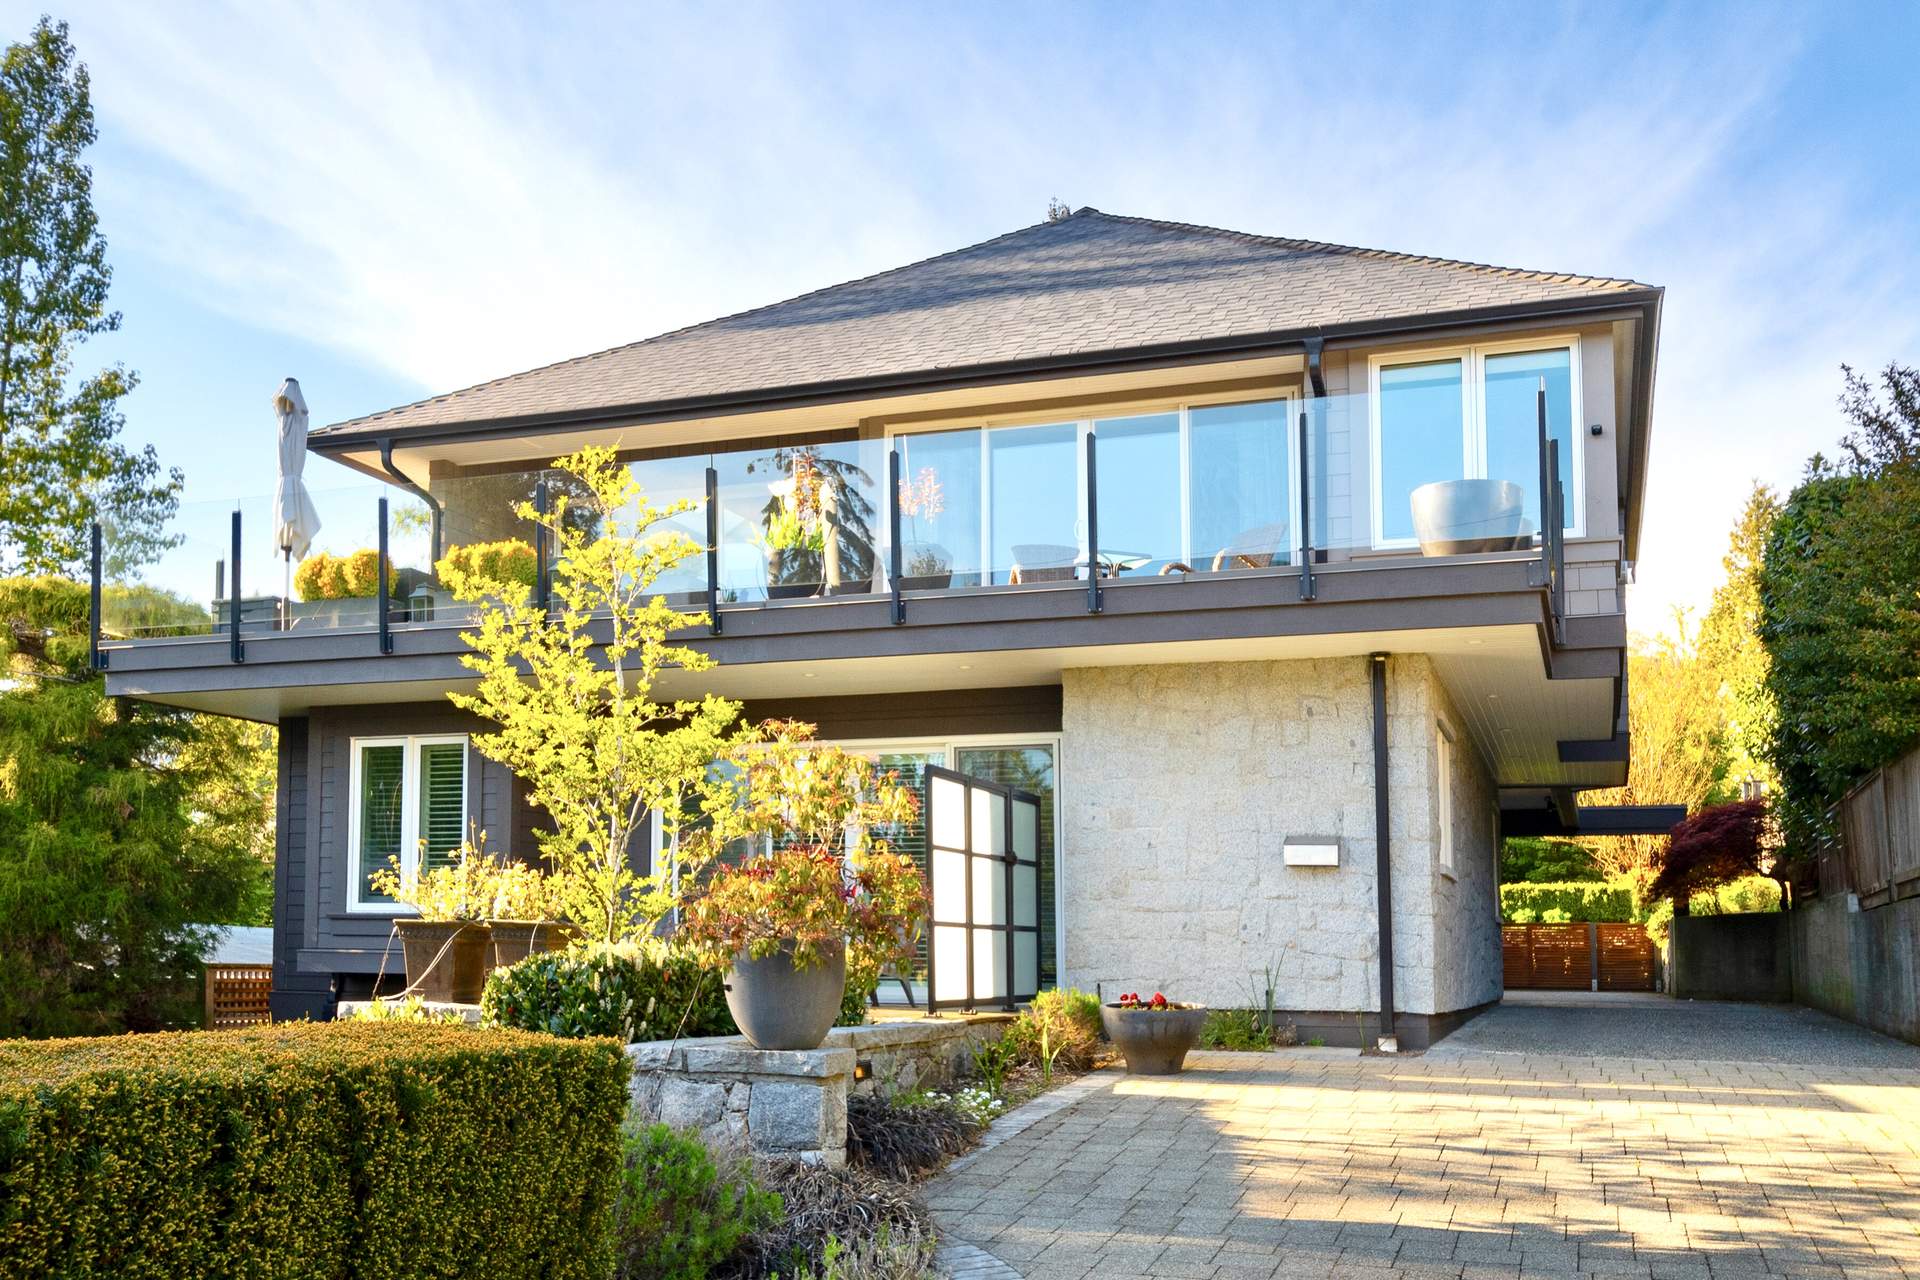 Stunning home with “Architectural flair” located in the most desirable tucked away enclave in West Vancouver.